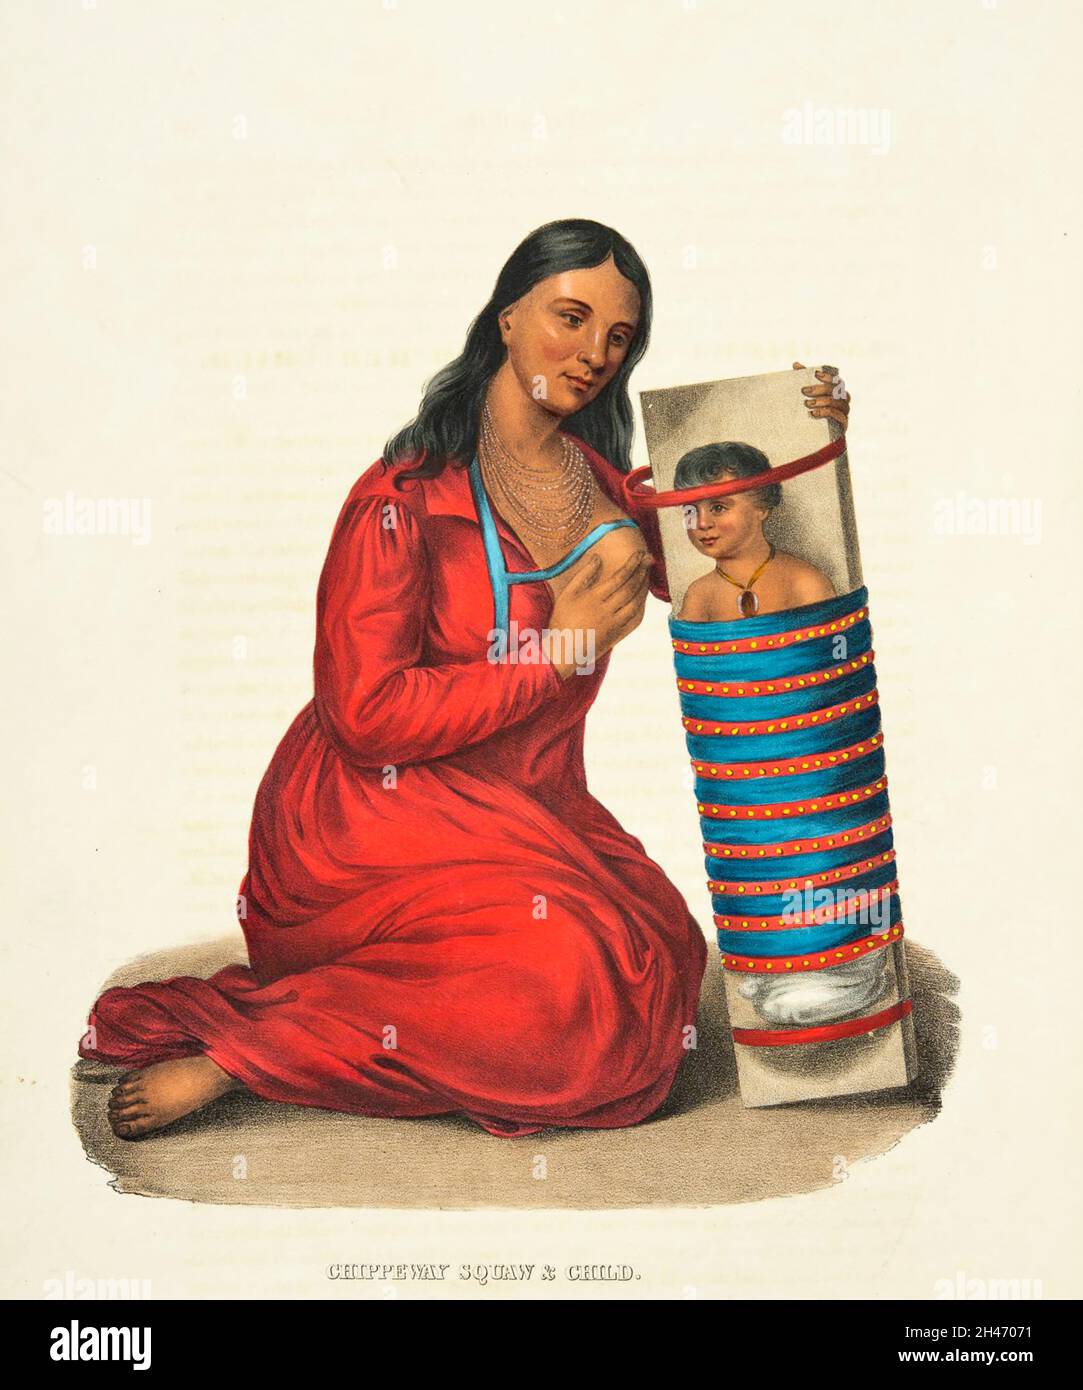 Chippeway (Ojibwa) Squaw and Child from the book ' History of the Indian Tribes of North America with biographical sketches and anecdotes of the principal chiefs. ' Volume 1 of 3 by Thomas Loraine,McKenney and James Hall Esq. Published in 1838 Painted by Charles Bird King Stock Photo